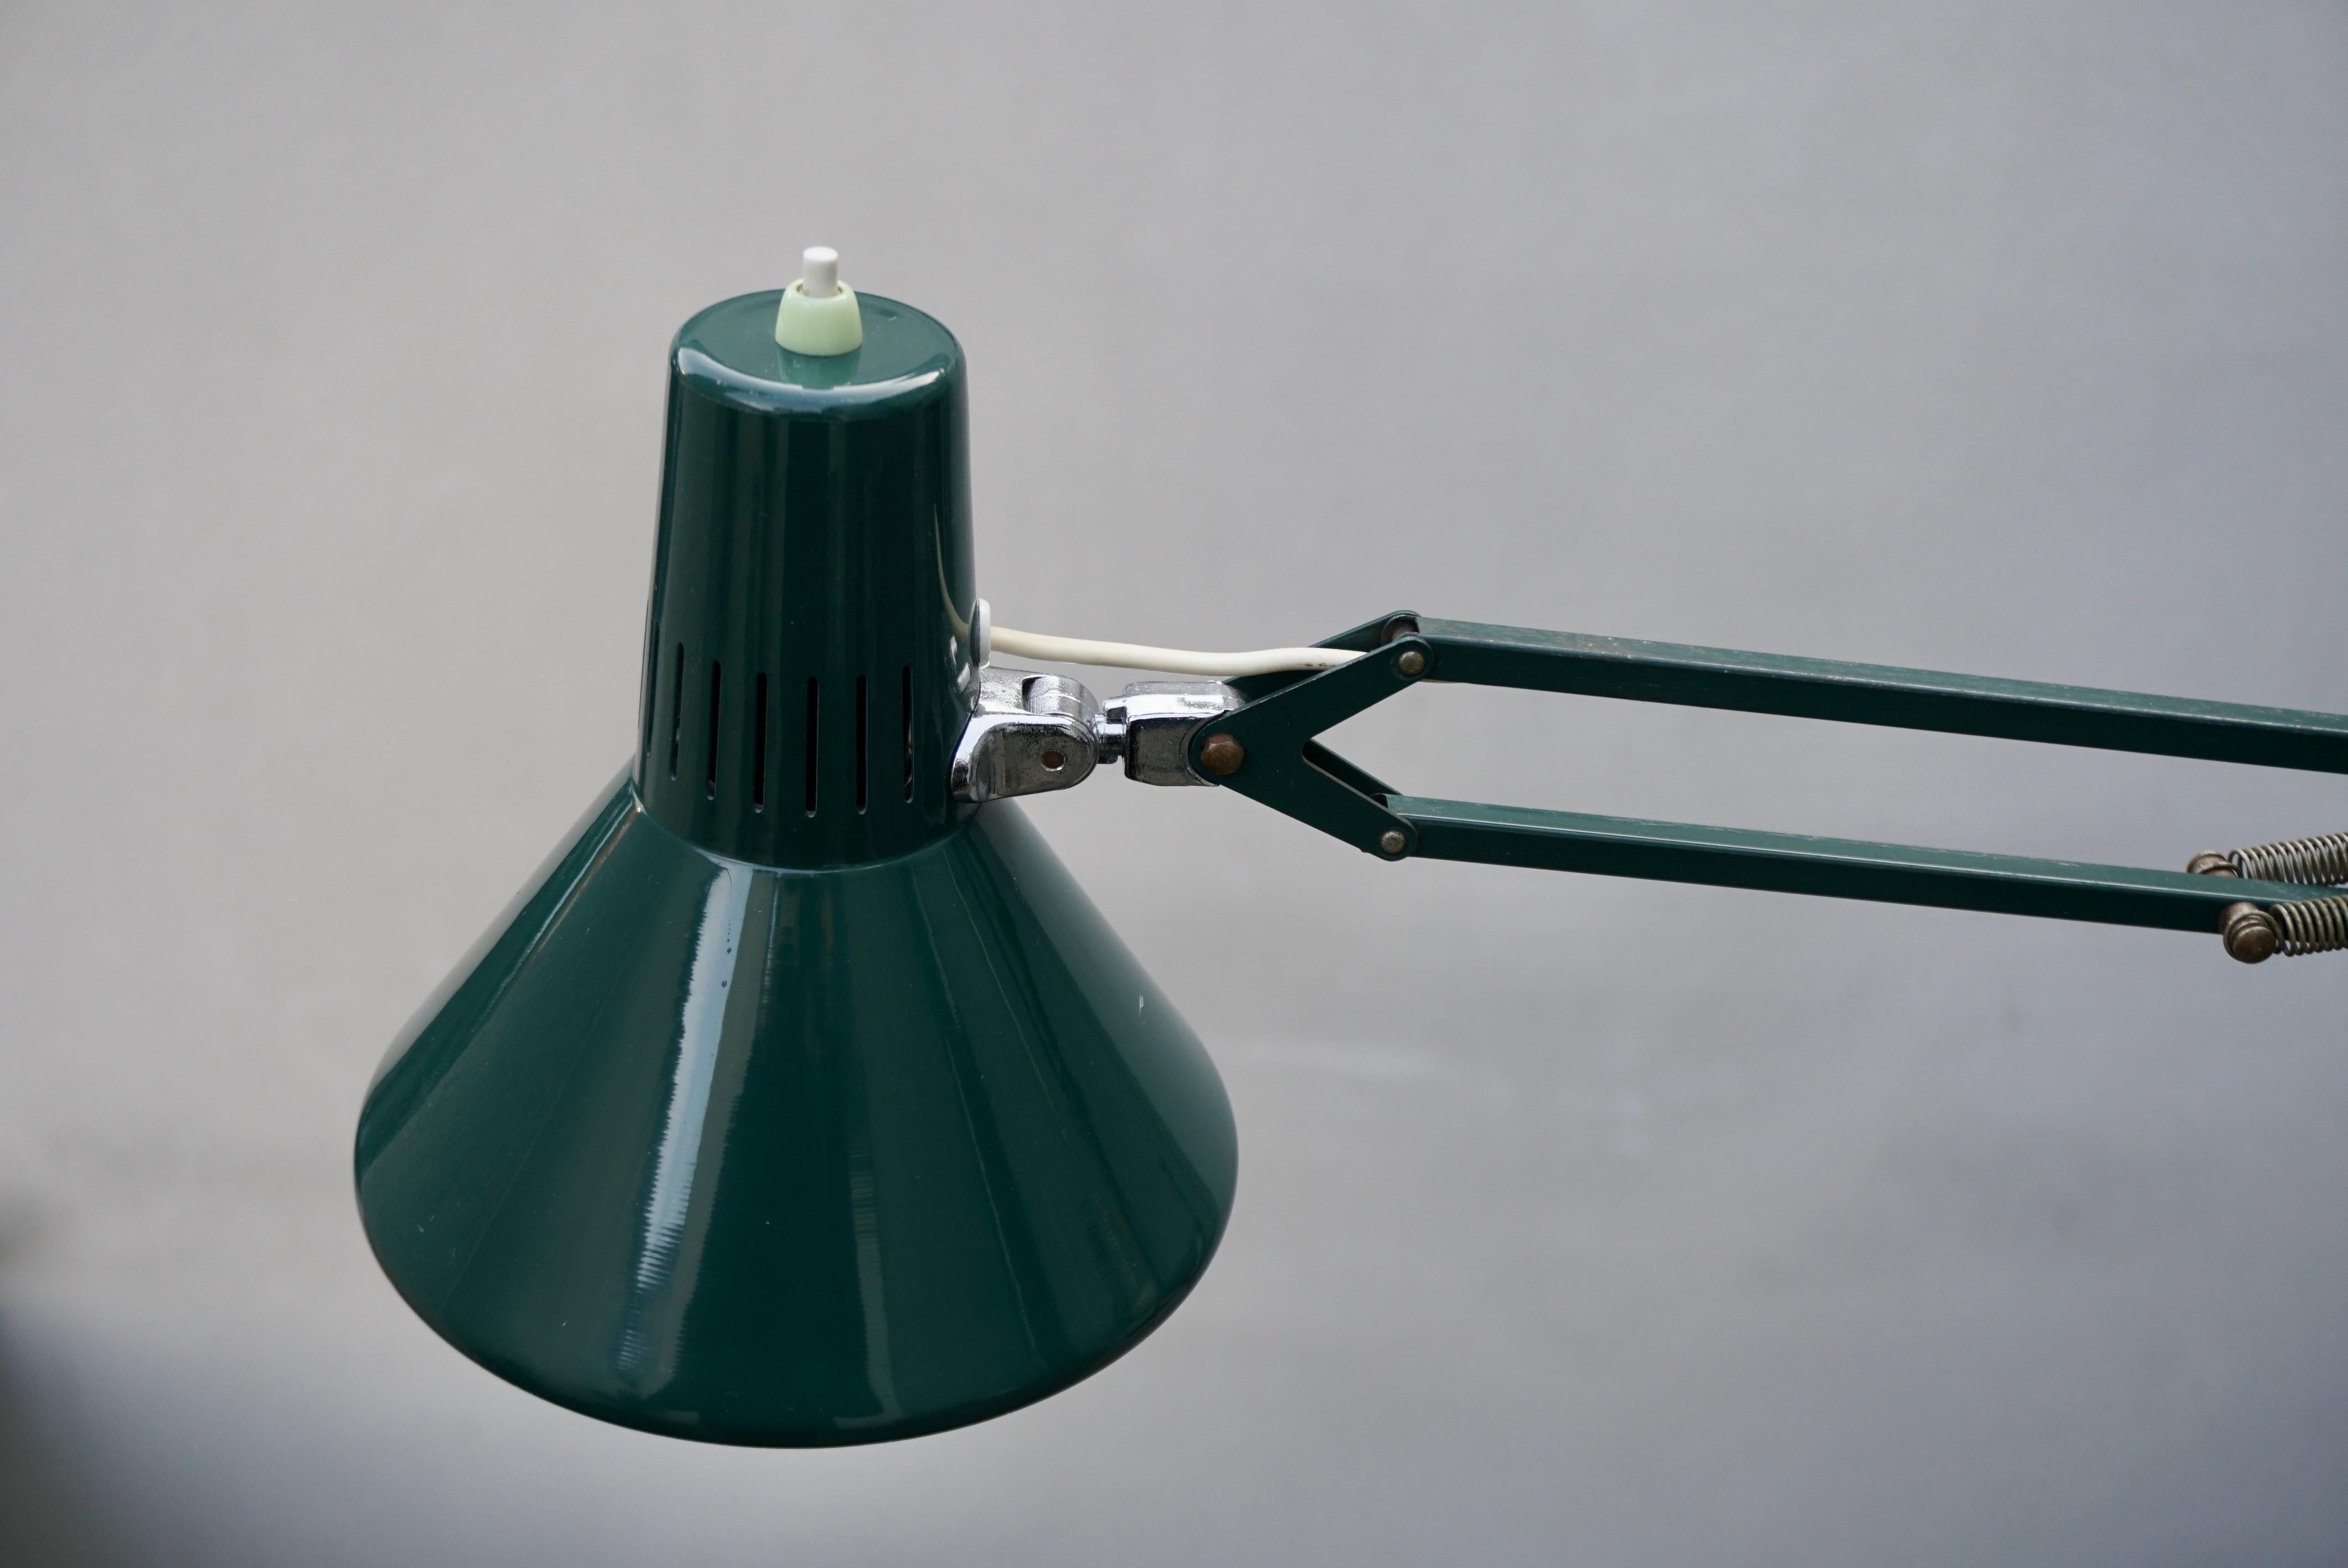 Industrial Office Architect Desk Lamp by Ledu, 1970s, Made in Sweden For Sale 8